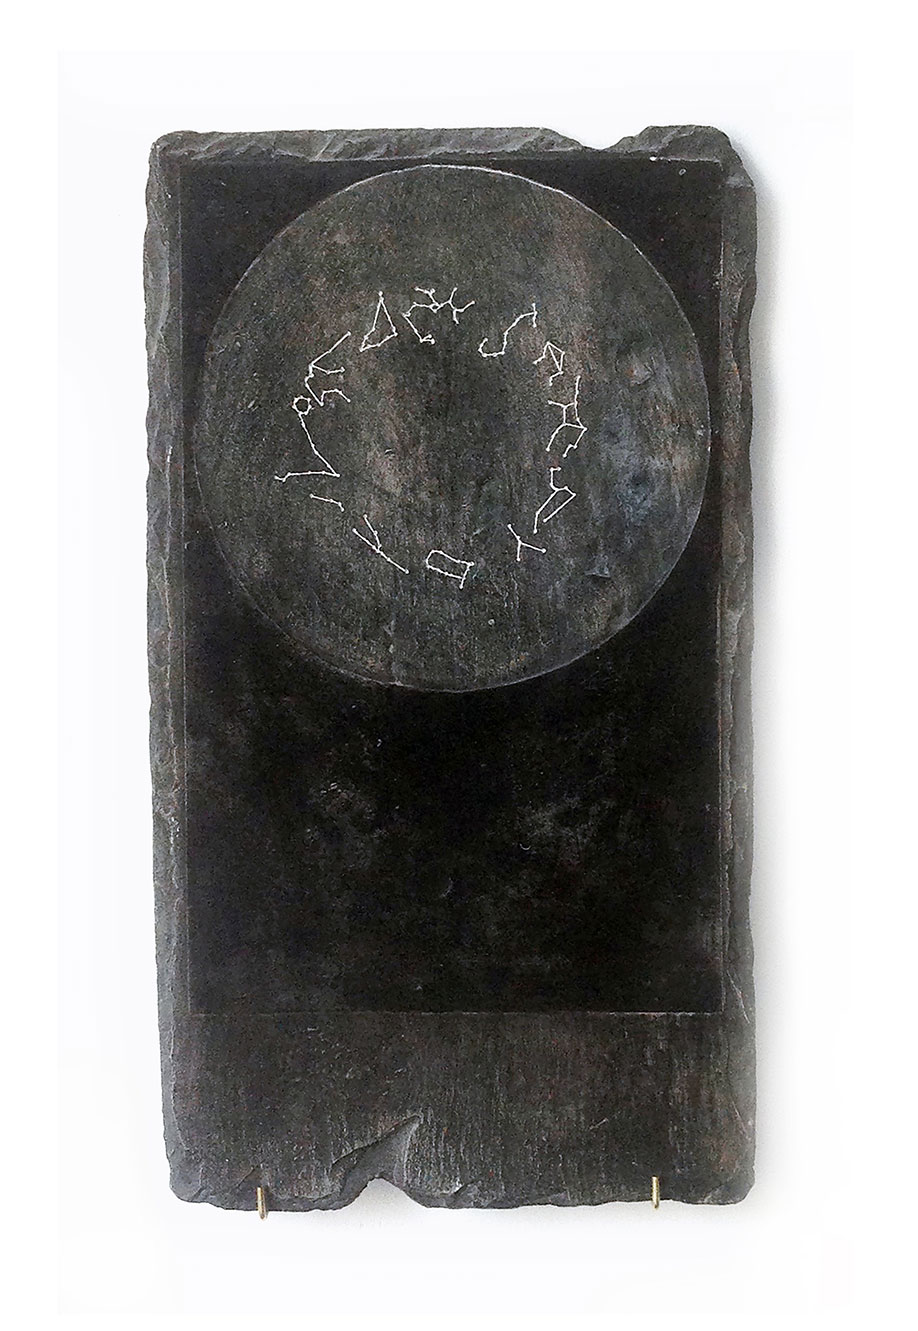 <b>Title: </b>Zodiac (I)<br /><b>Year: </b>2016<br /><b>Medium: </b>Plaster, graphite, oil and metal fixings<br /><b>Size: </b>41 x 23 x 1 cm